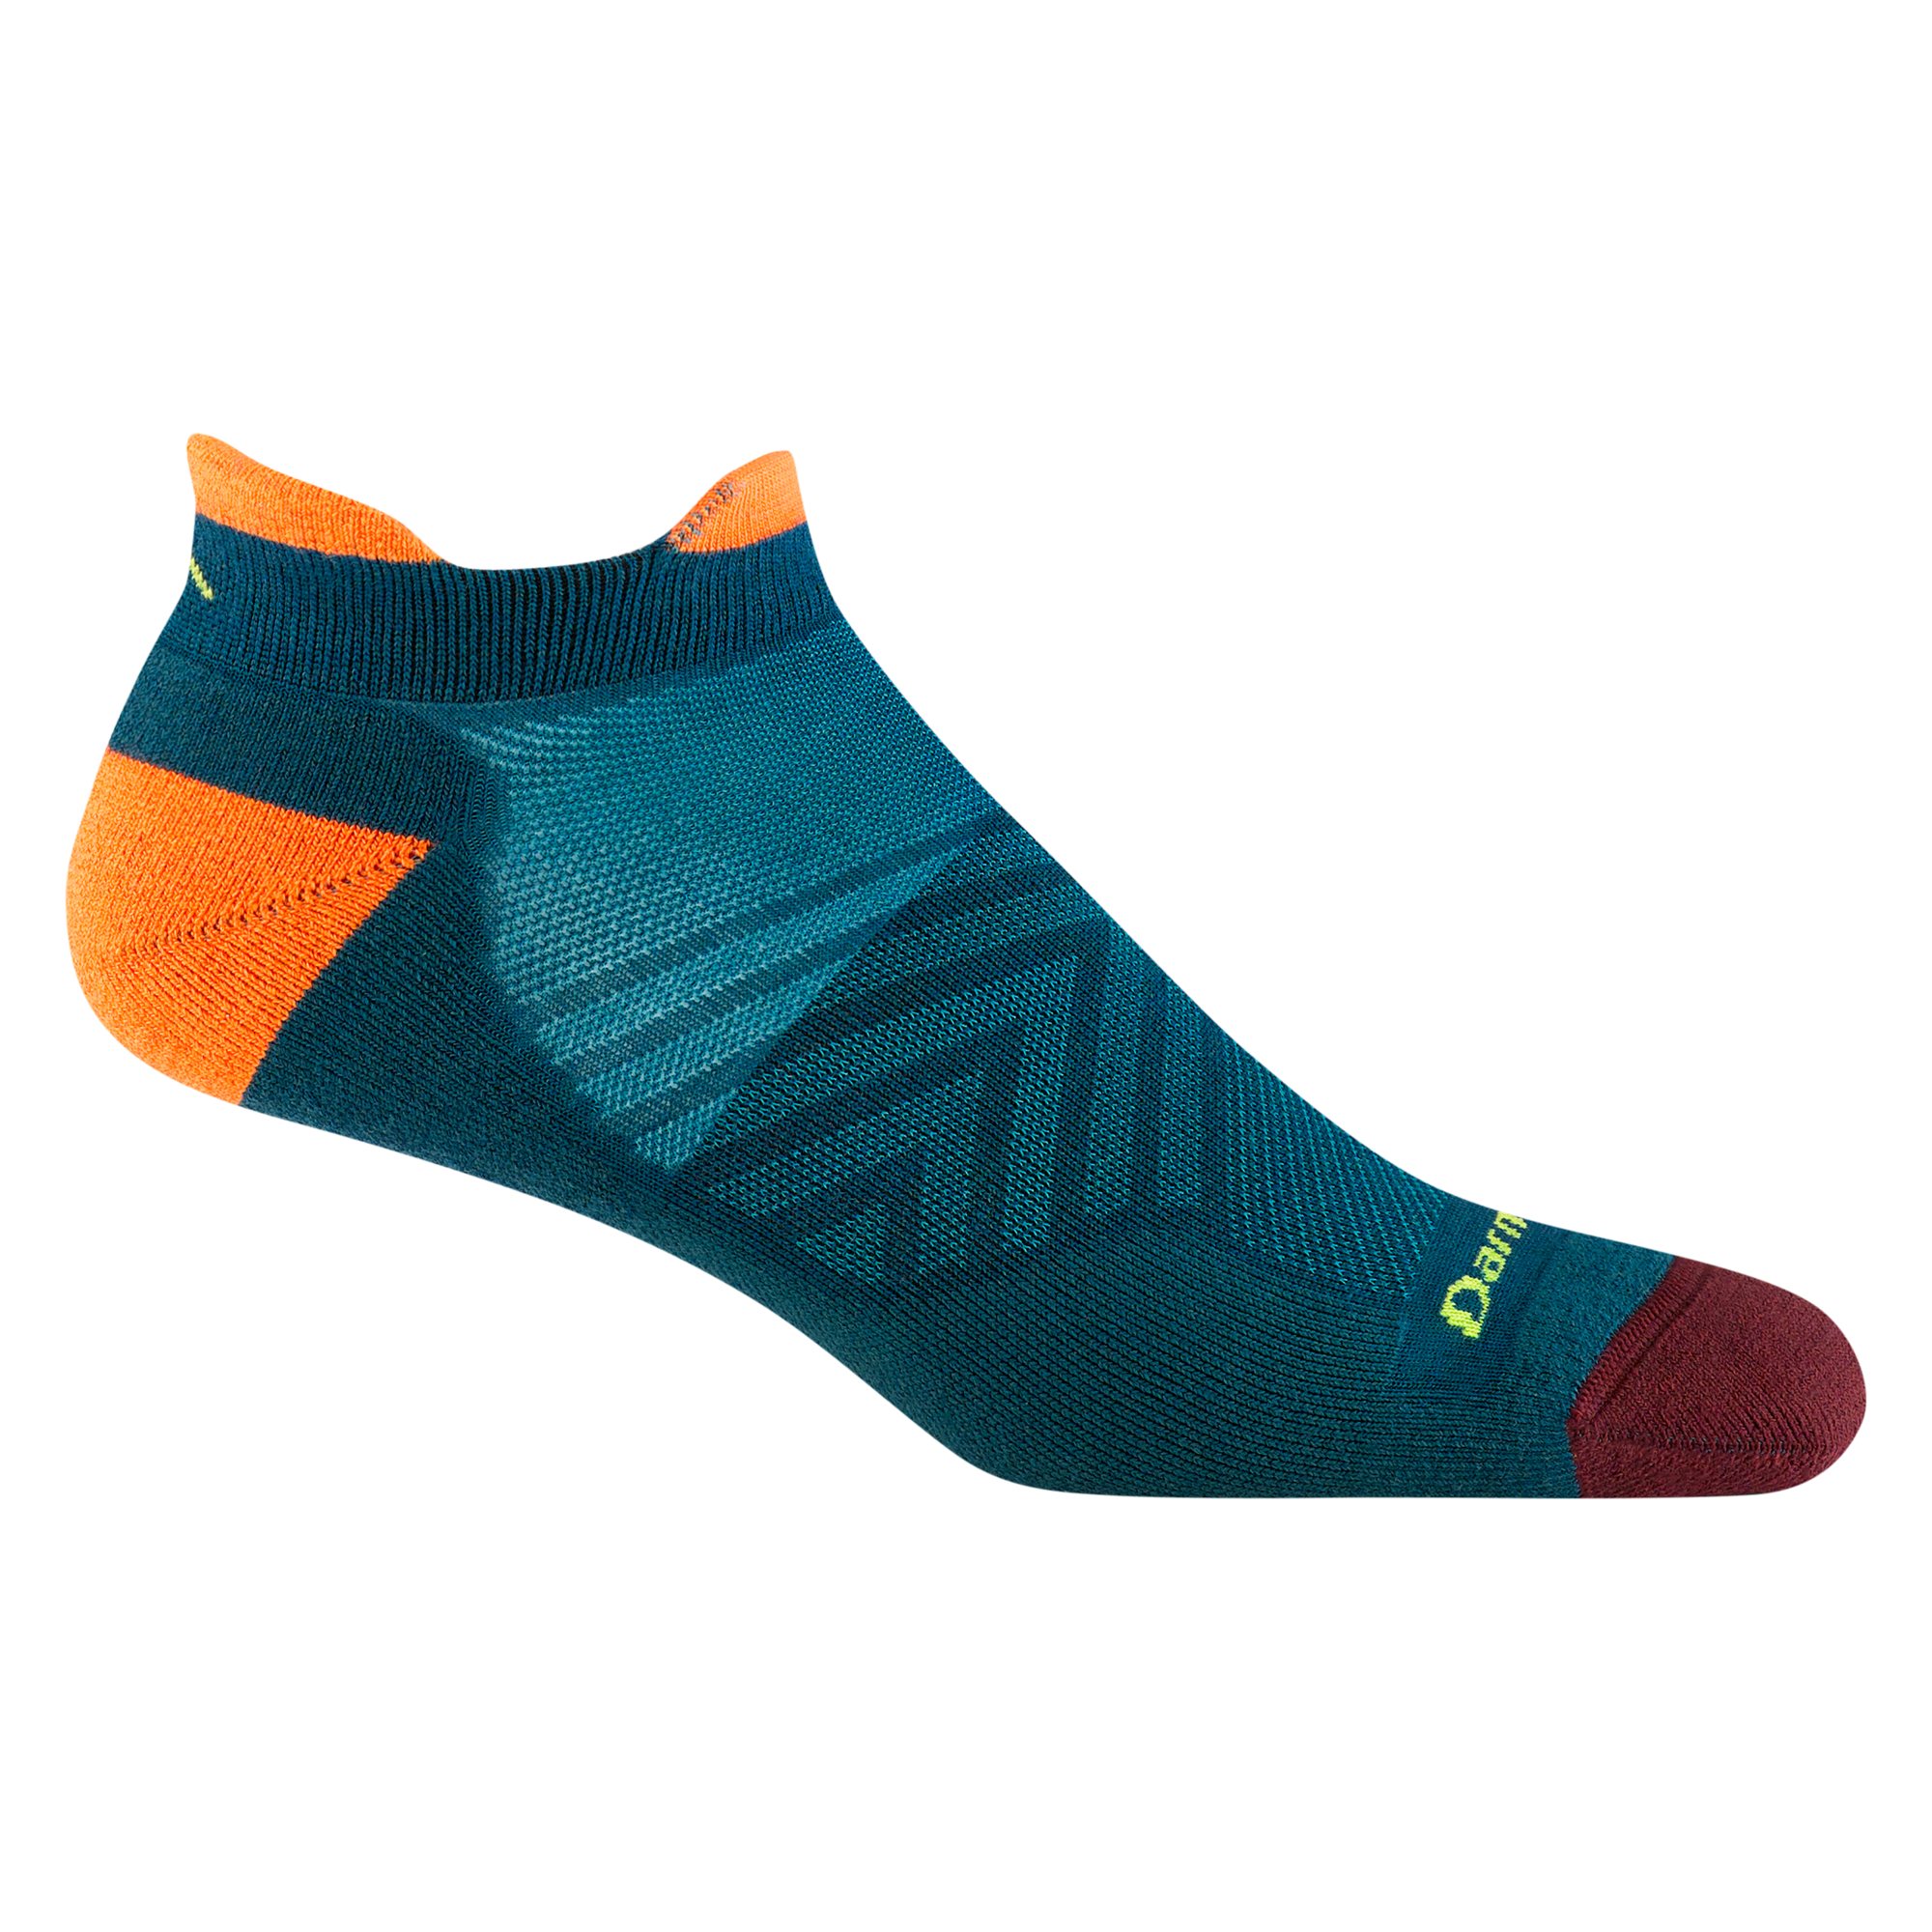 1039 men's no show tab running sock in dark teal with burgundy toe and orange heel and tab accents